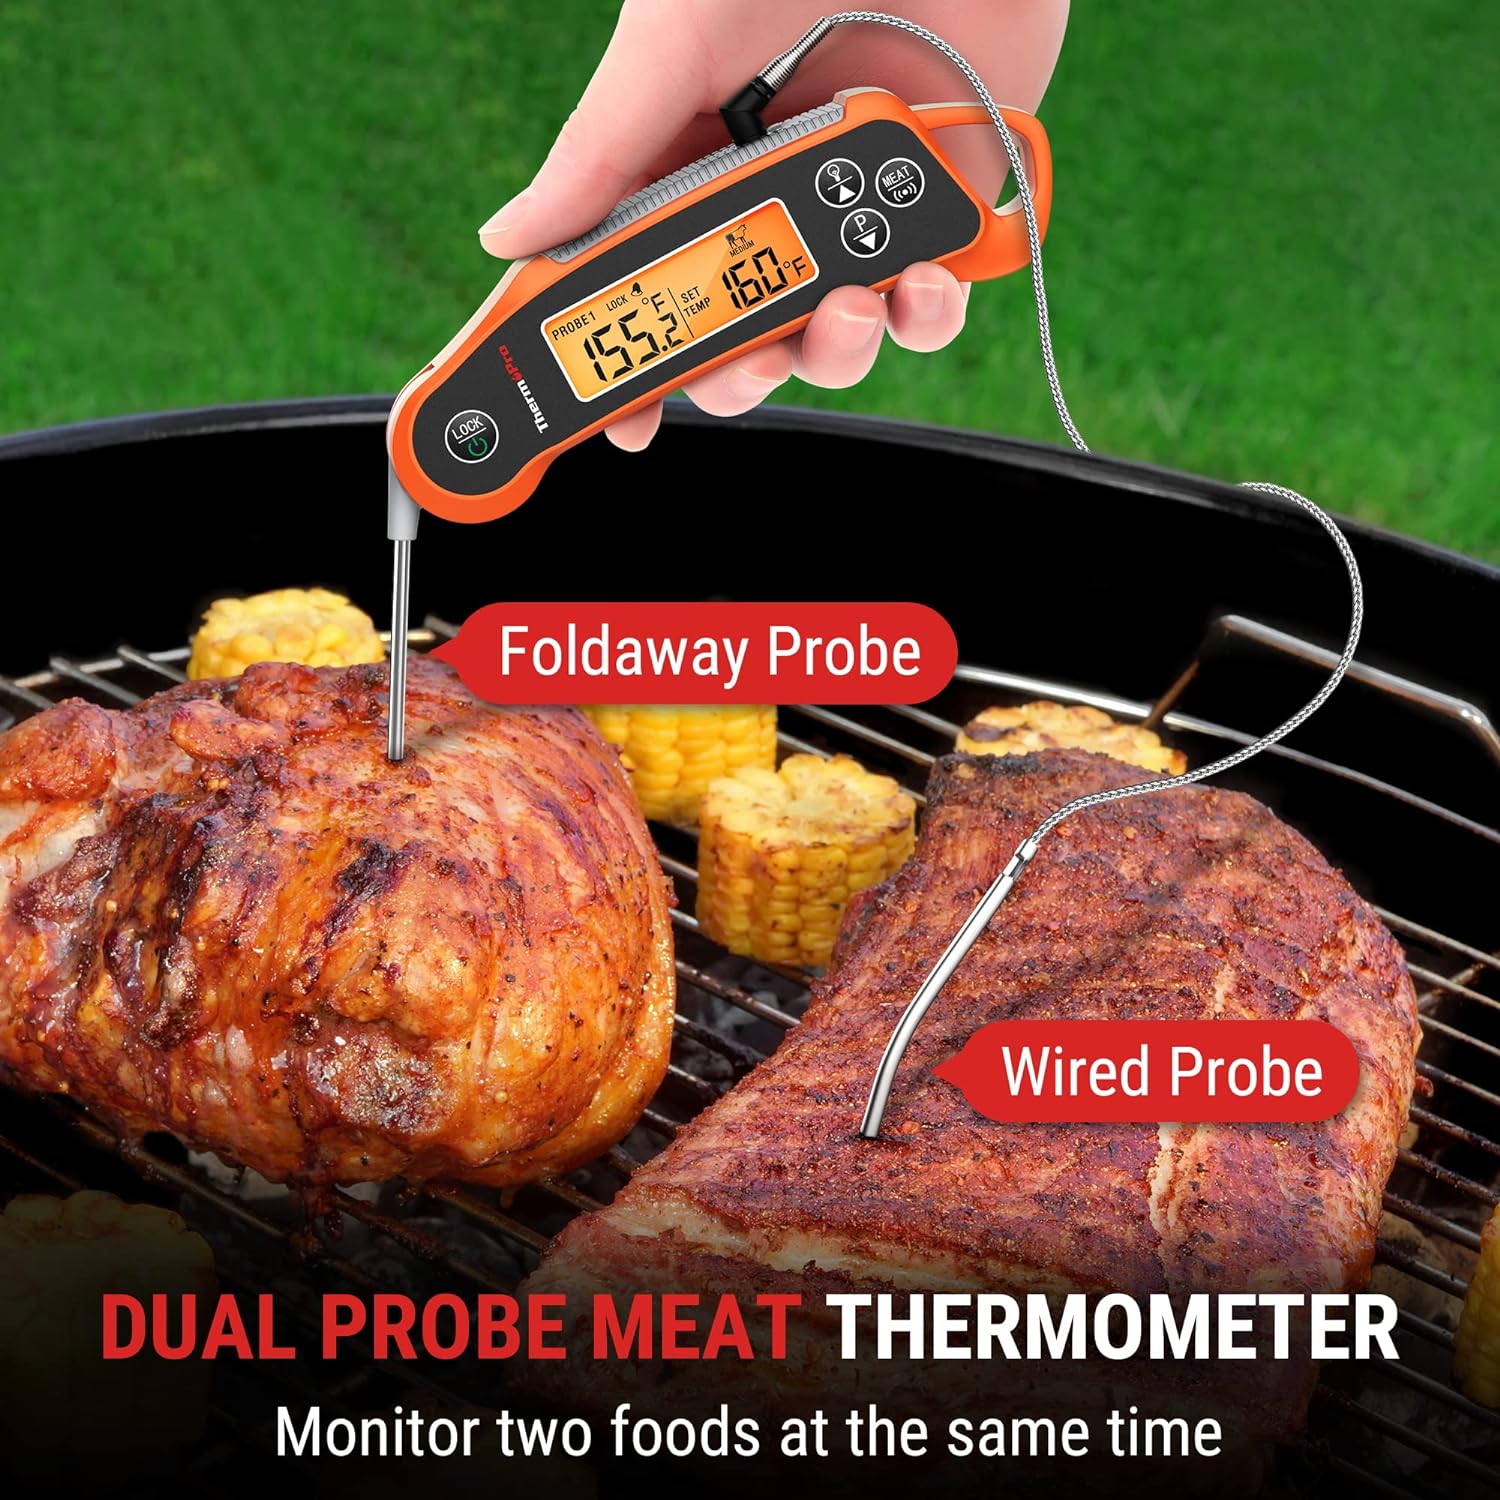 ThermoPro TP710 Instant Read Meat Thermometer Digital for Cooking, 2-in-1 Waterproof Kitchen Food Thermometer with Dual Probes and Dual Temperature Display for Oven, Grilling, Smoker  BBQ